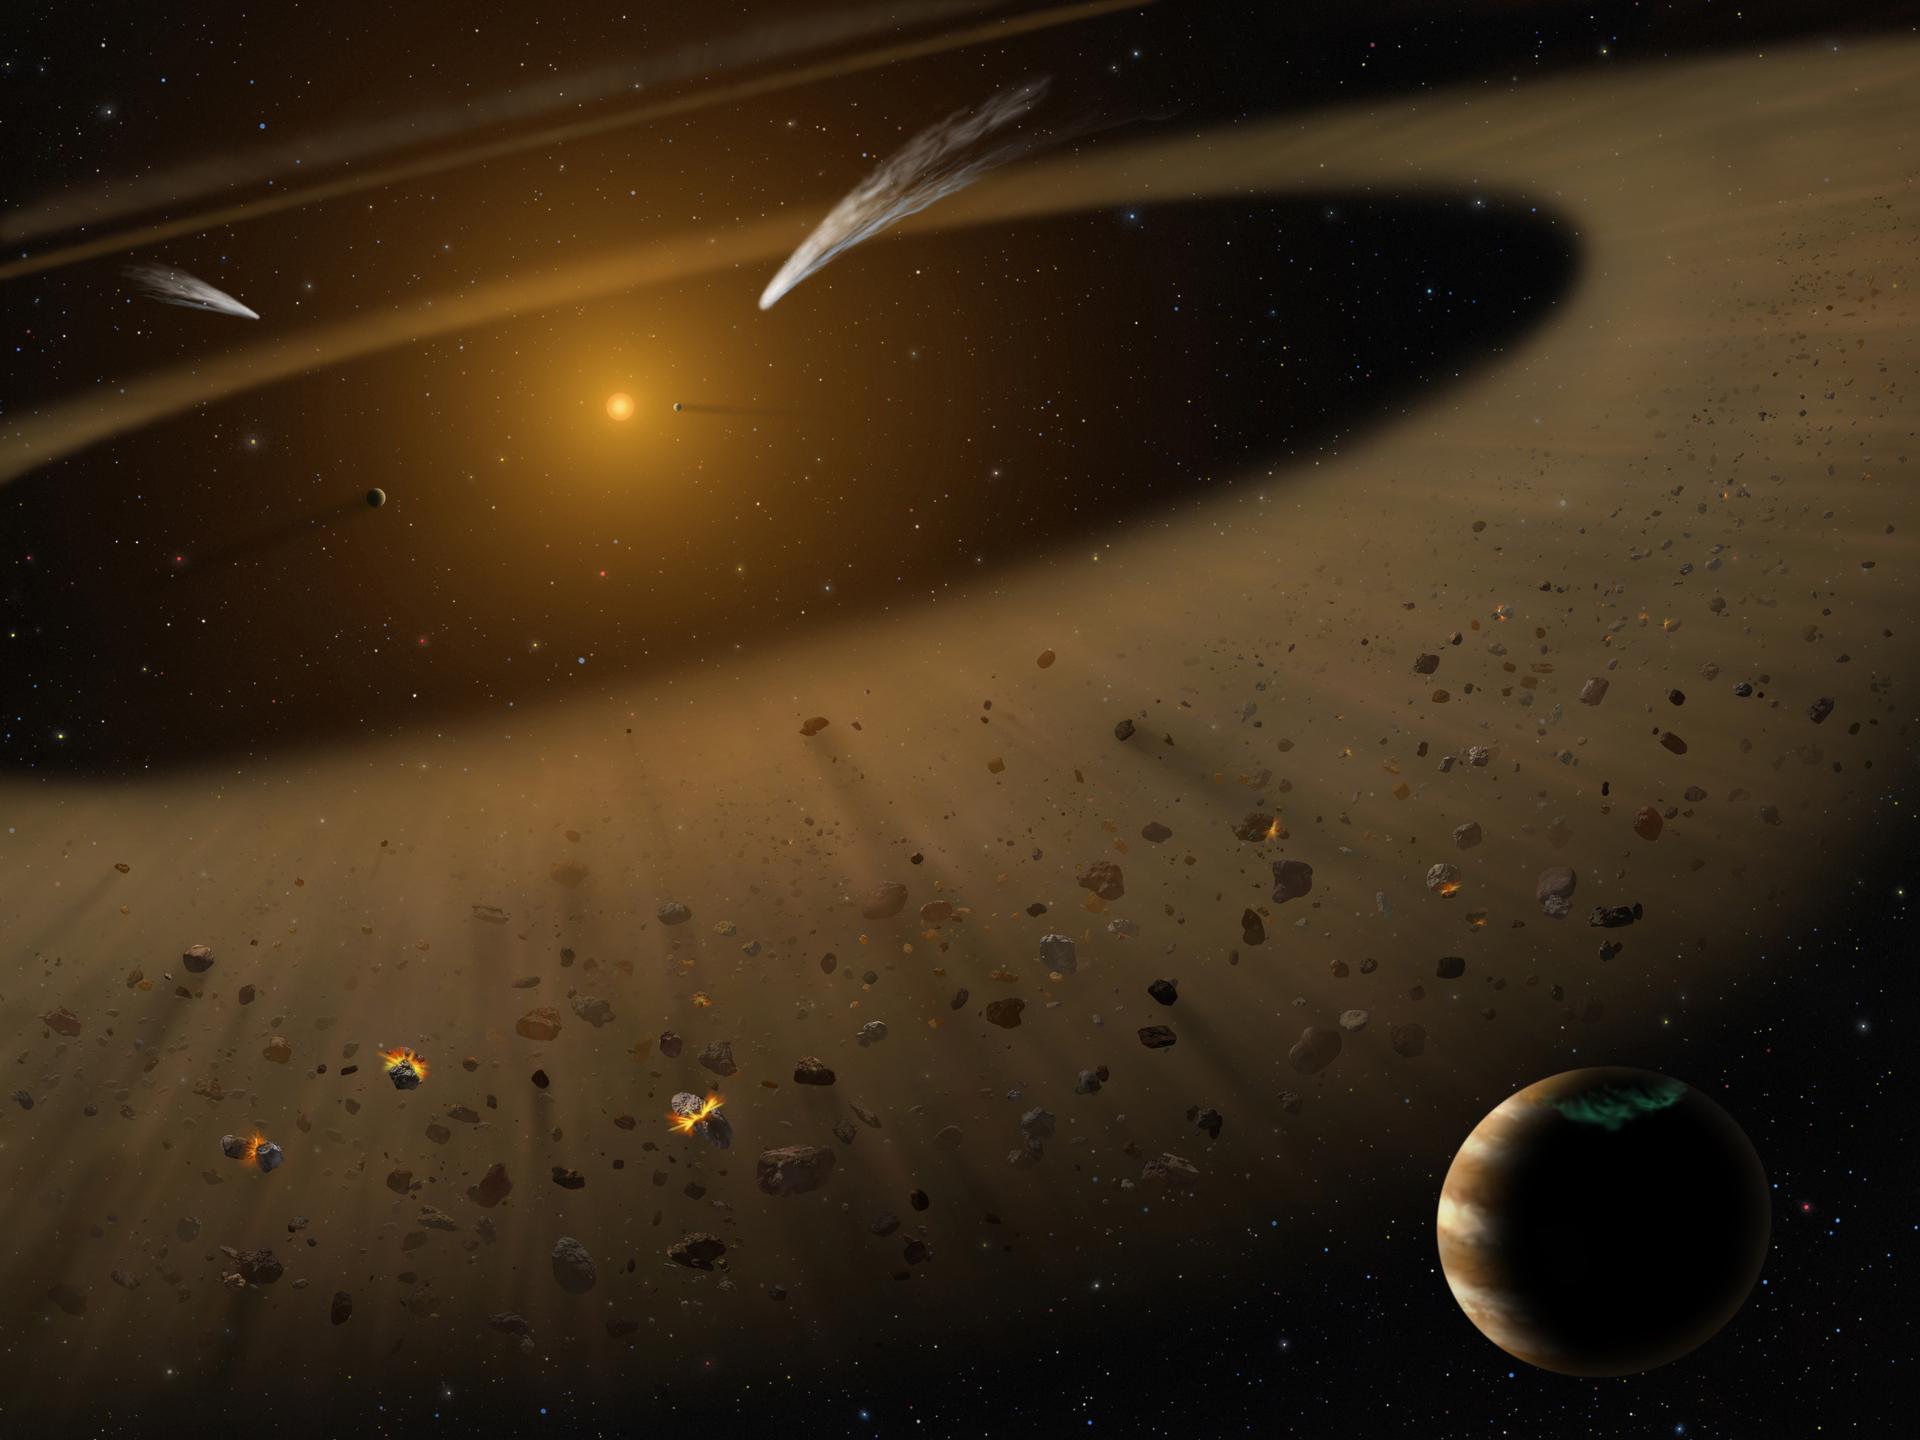 Artist's illustration of the Epsilon Eridani system showing Epsilon Eridani b, right foreground, a Jupiter-mass planet orbiting its parent star at the outside edge of an asteroid belt.